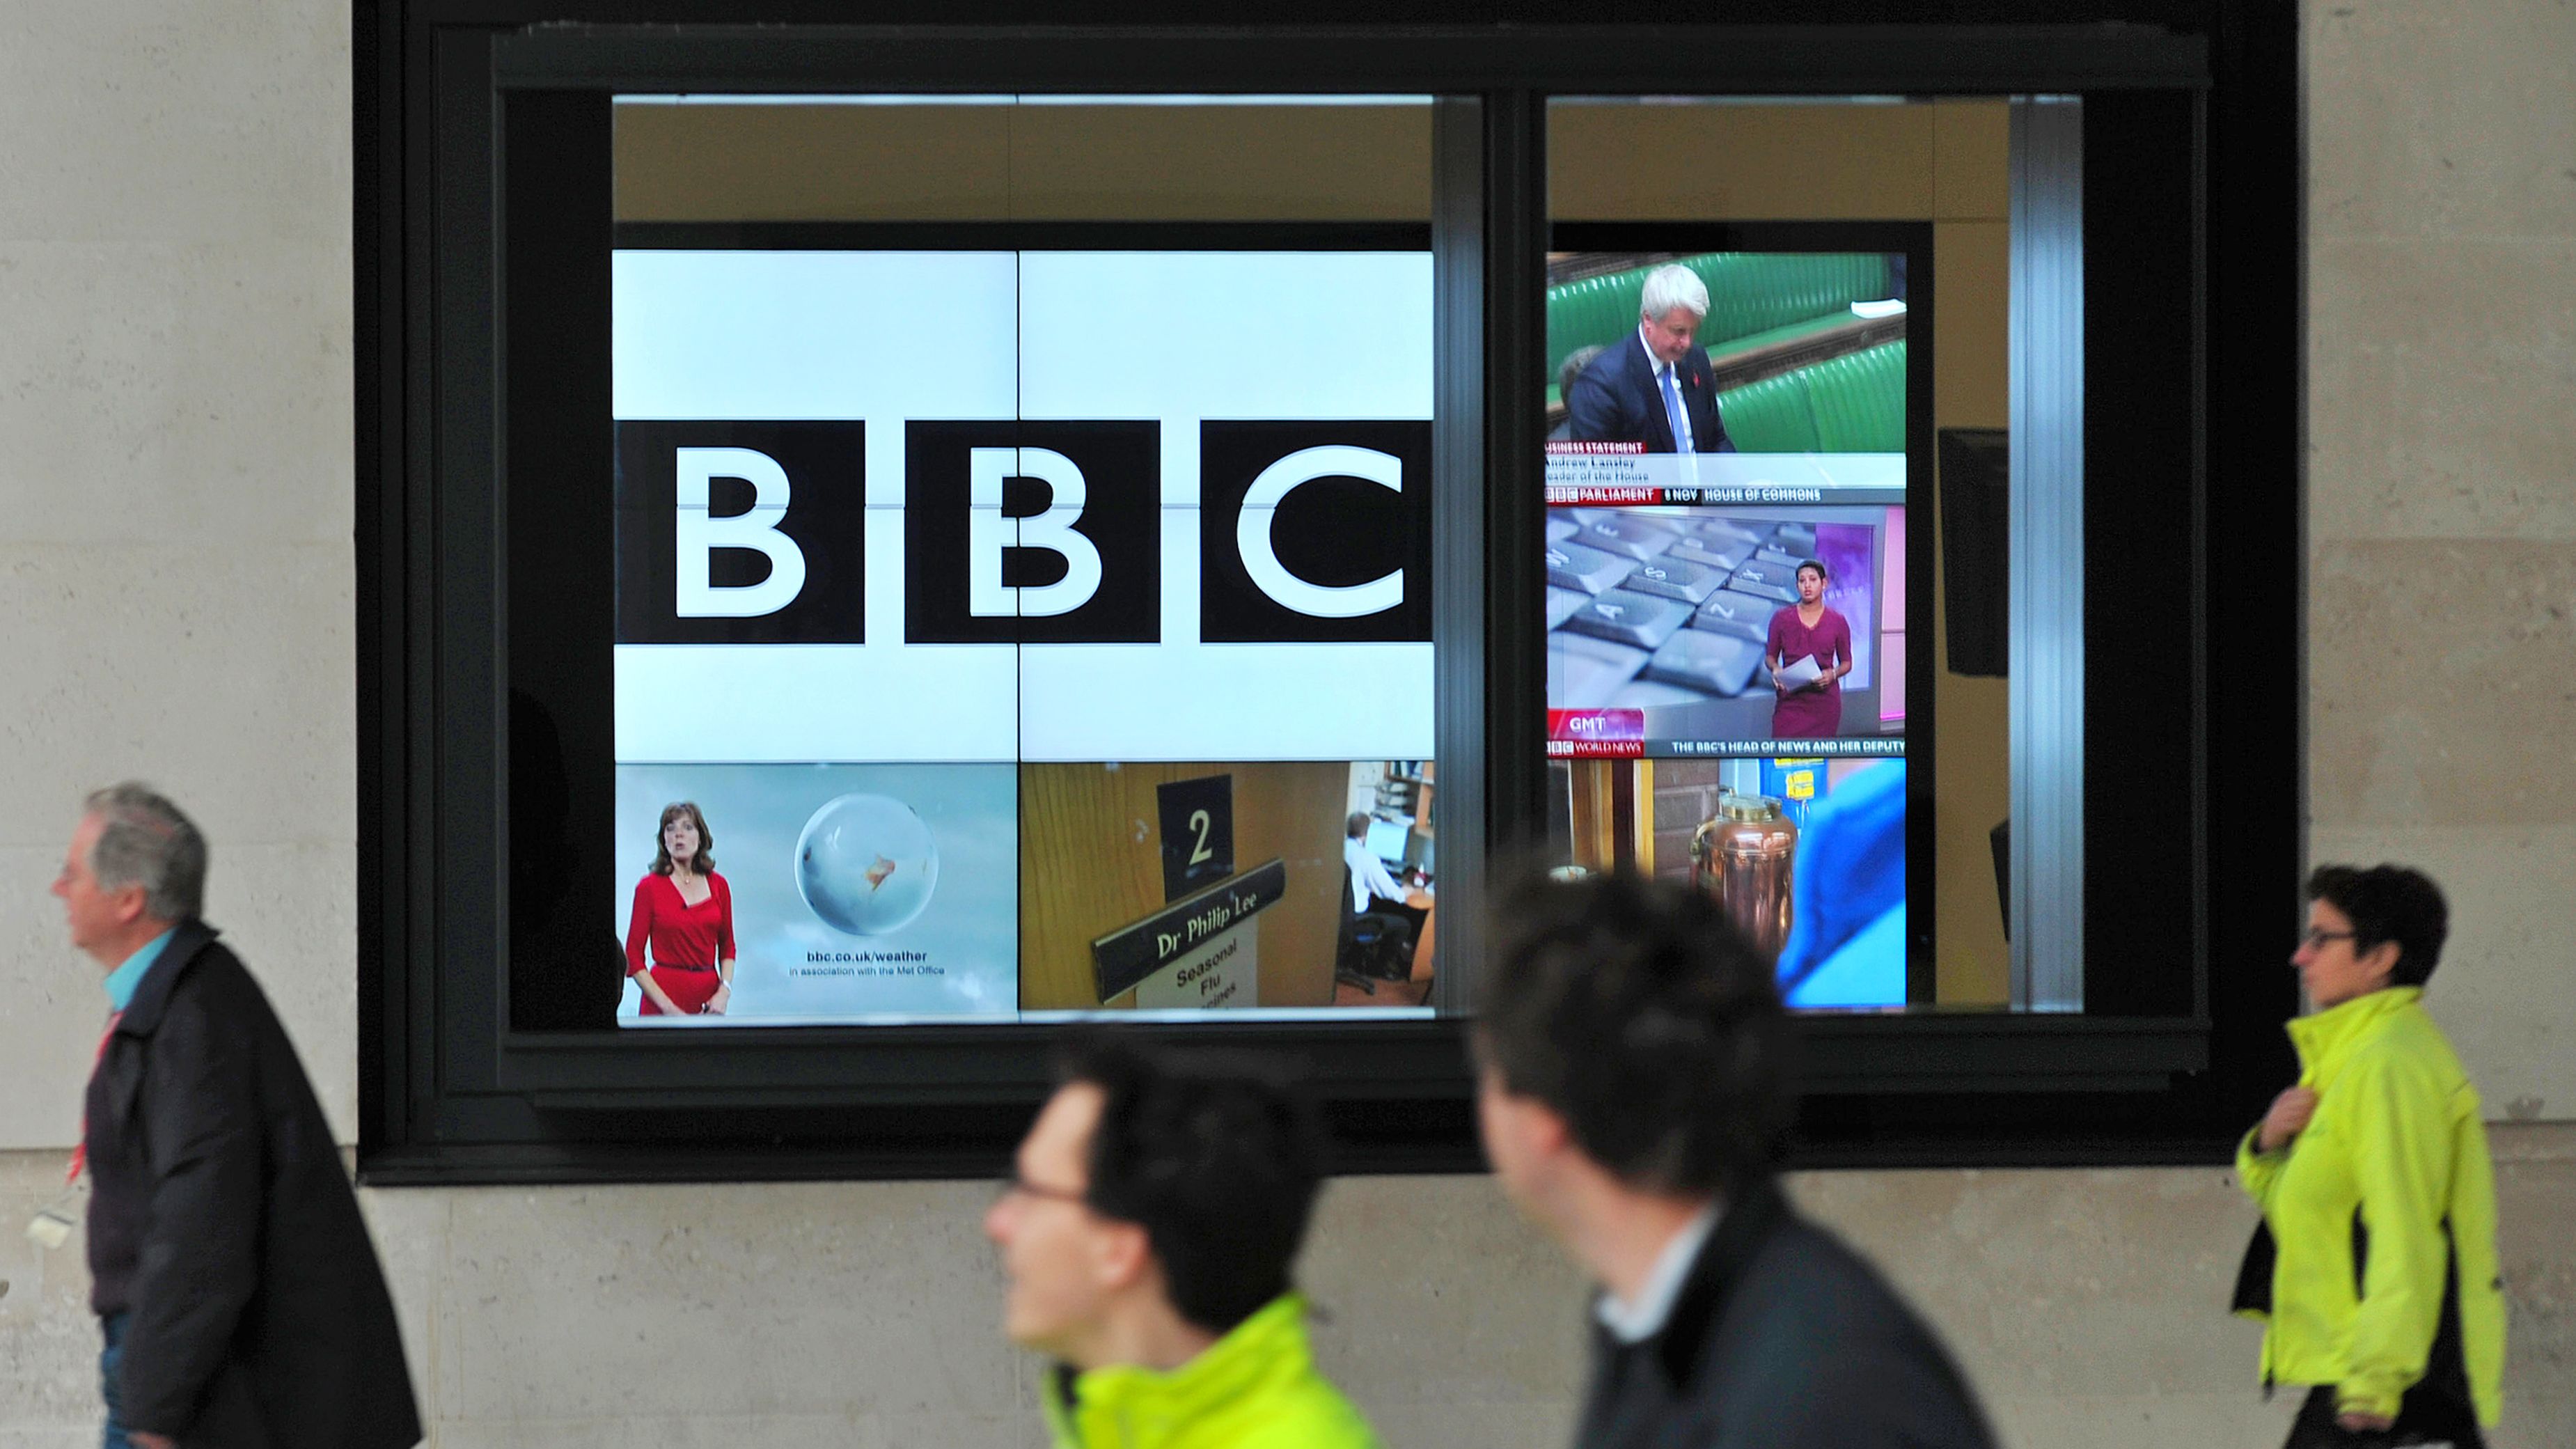 The BBC's director general resigned after a report that falsely implicated a former senior political official in a child sex scandal.